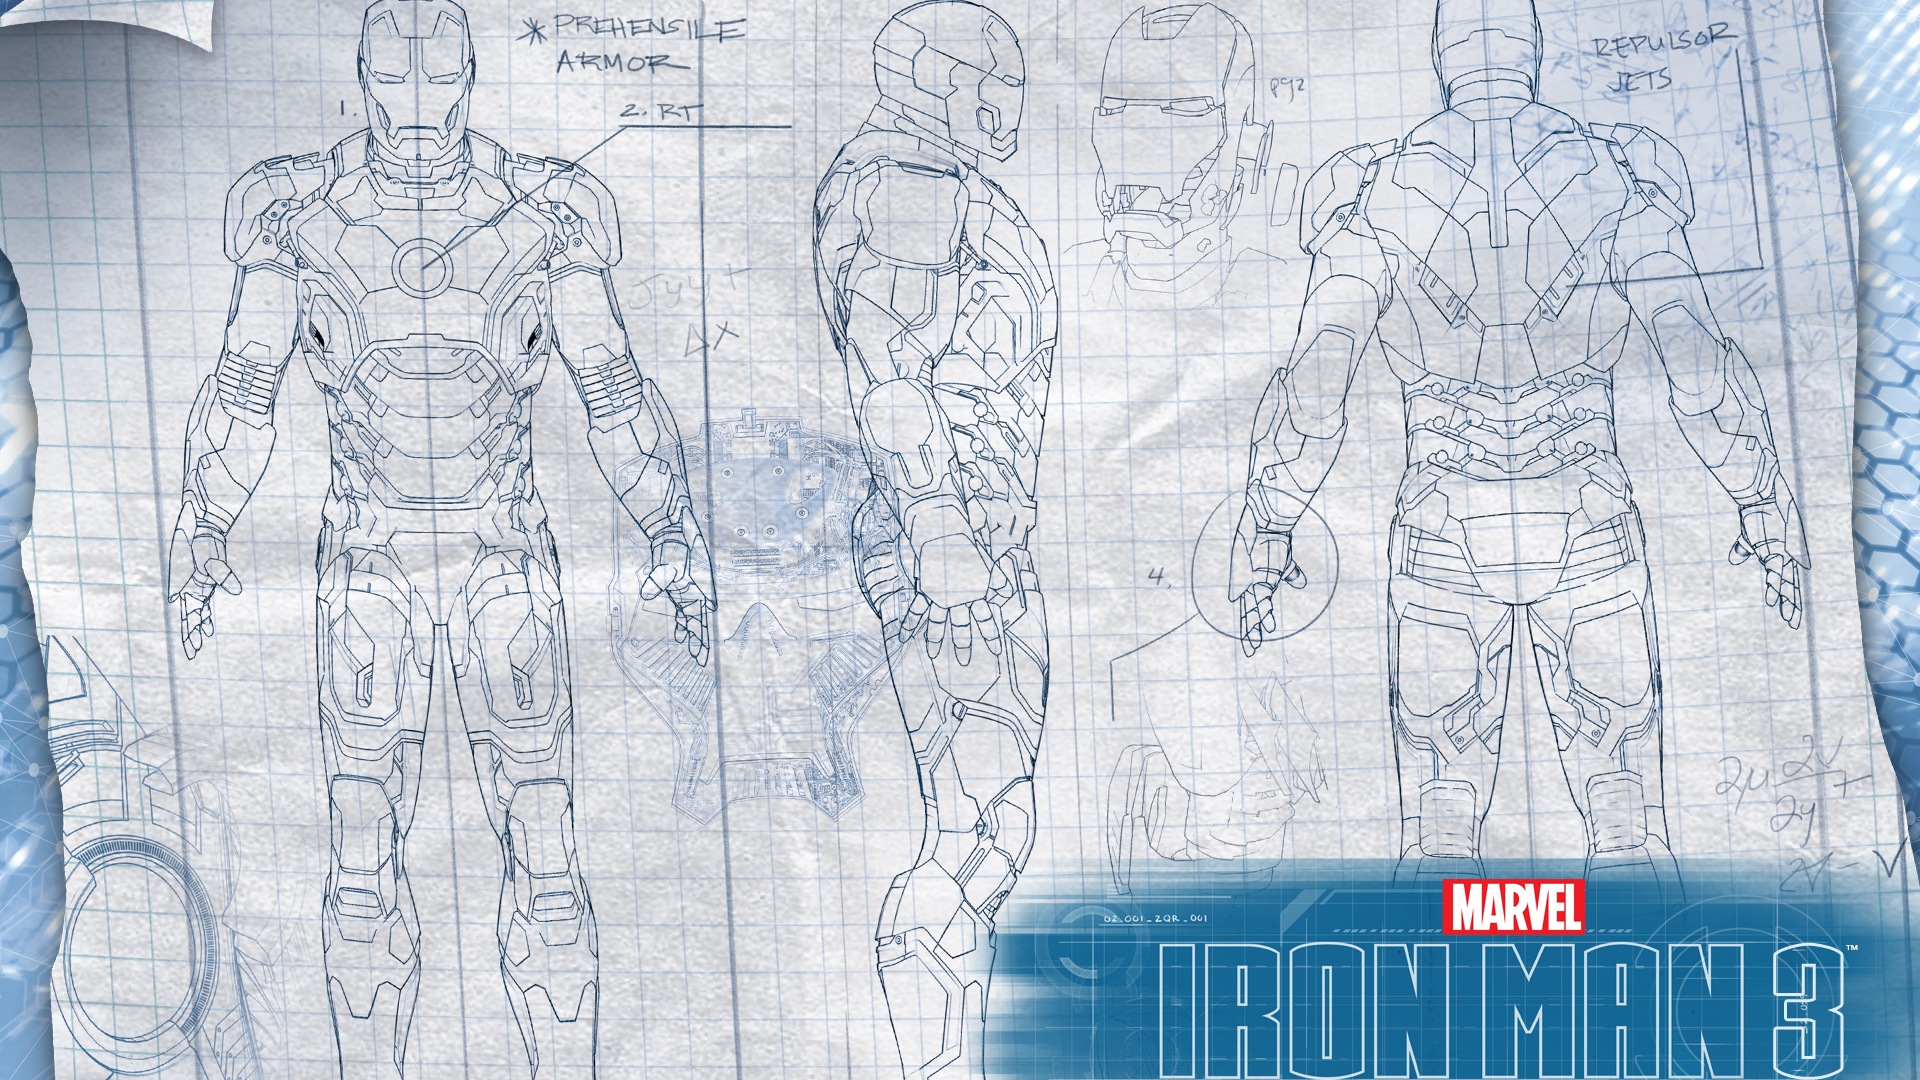 2013 Iron Man 3 newest HD wallpapers #8 - 1920x1080